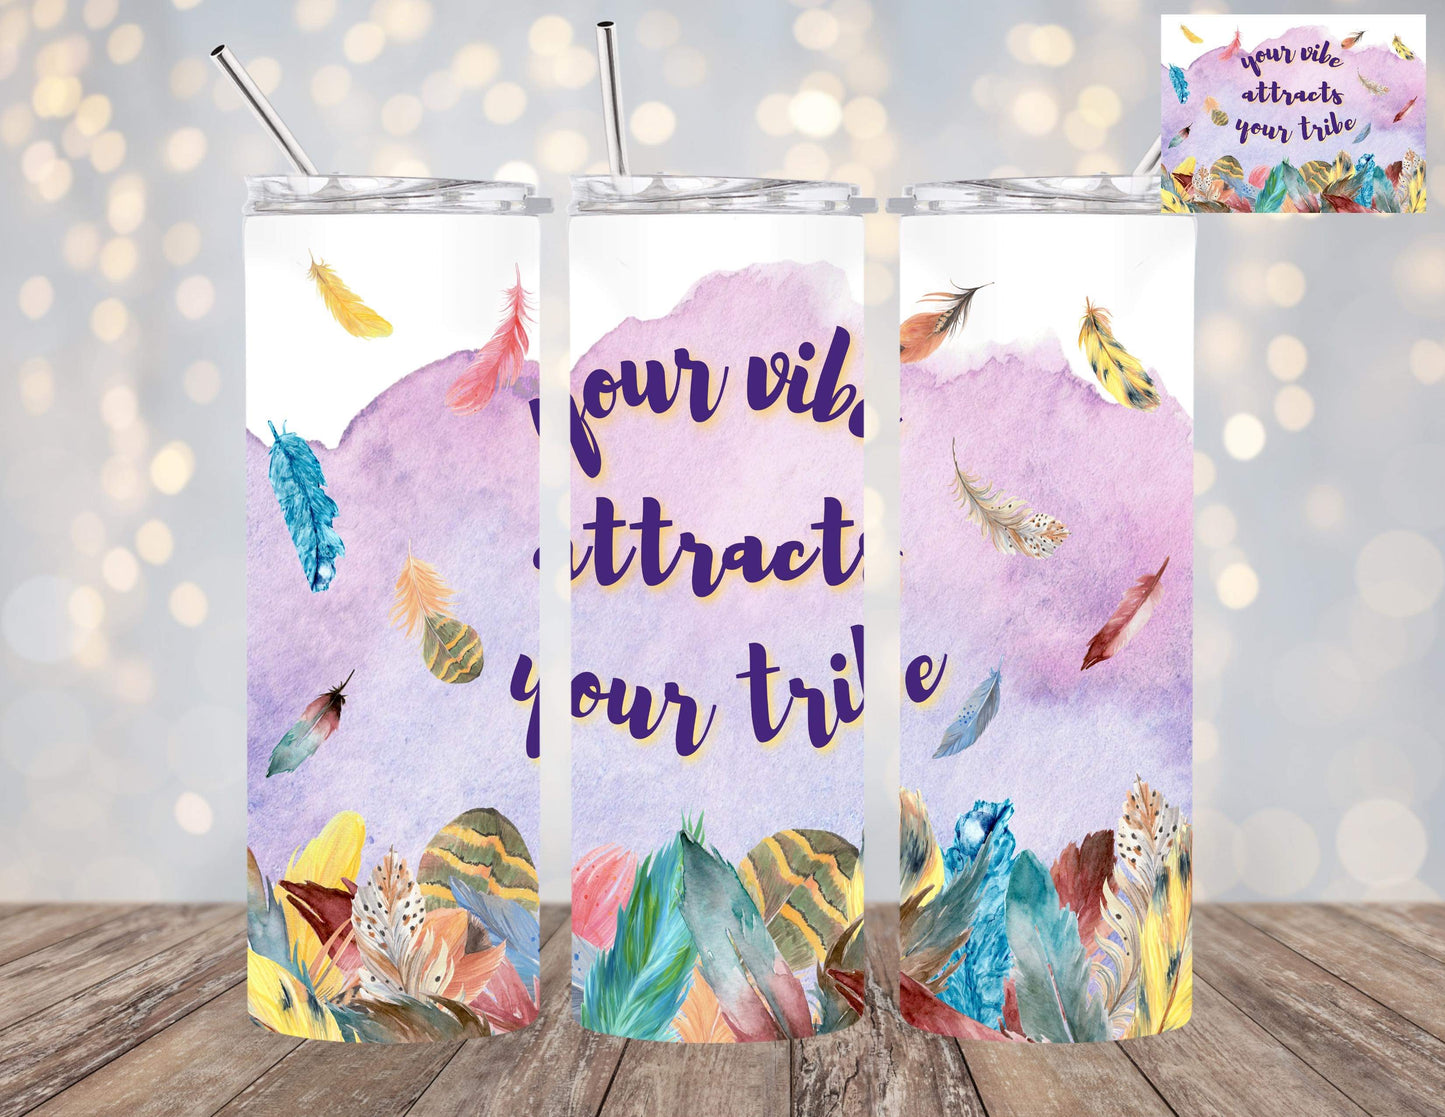 Your Vibe attracts your Tribe Feathered 20oz Tumbler with Watercolor back drop and various colors of feathers